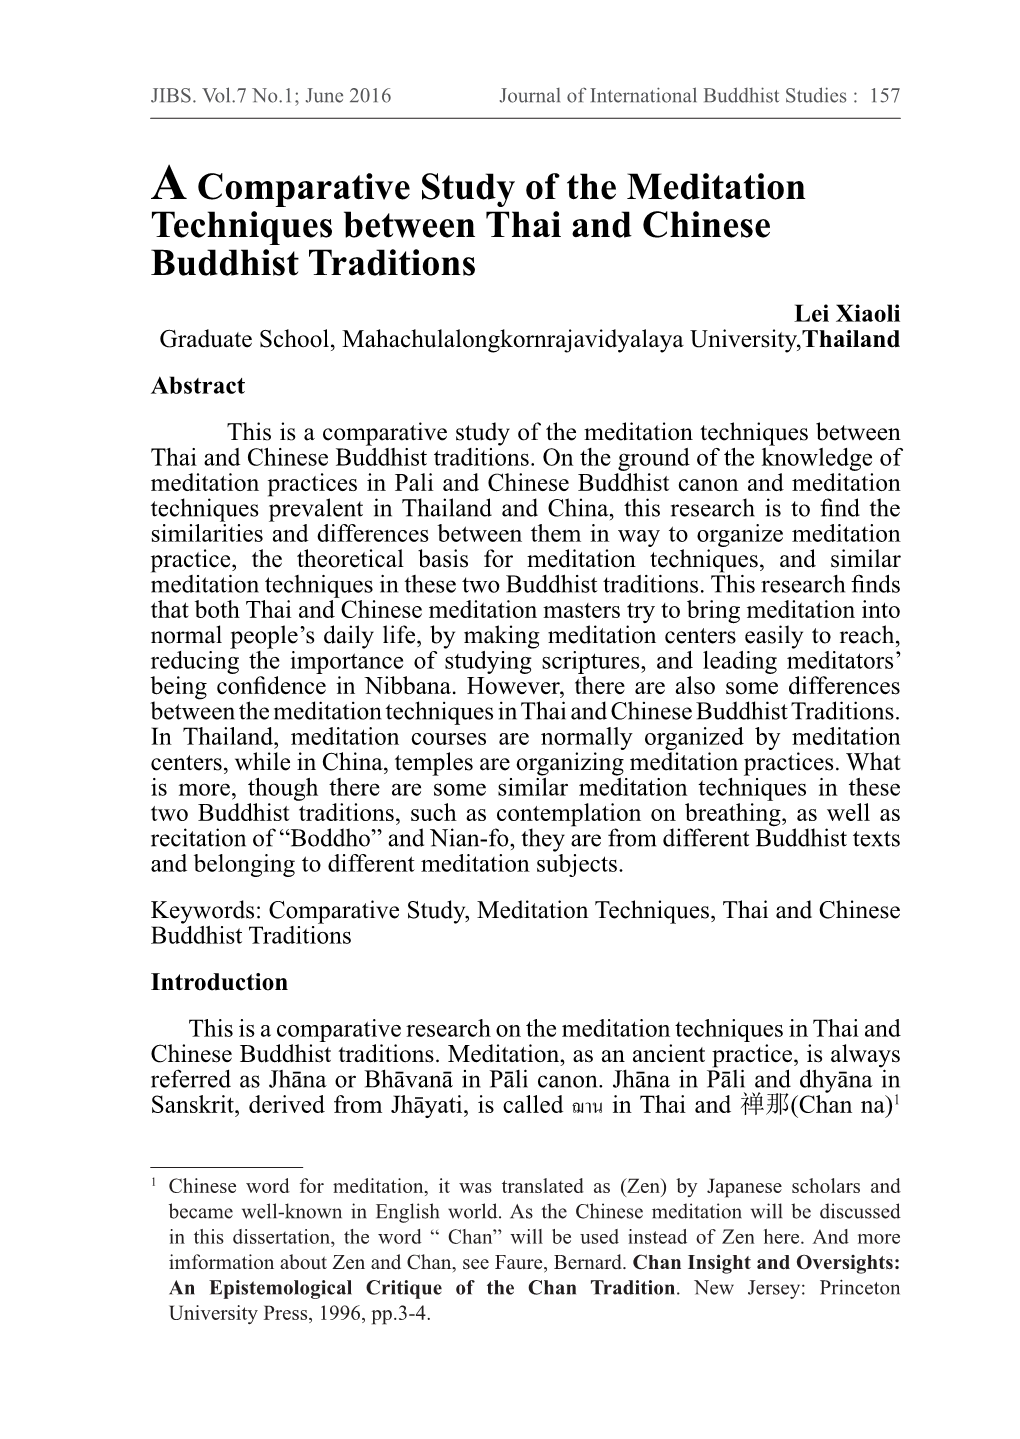 Acomparative Study of the Meditation Techniques Between Thai And